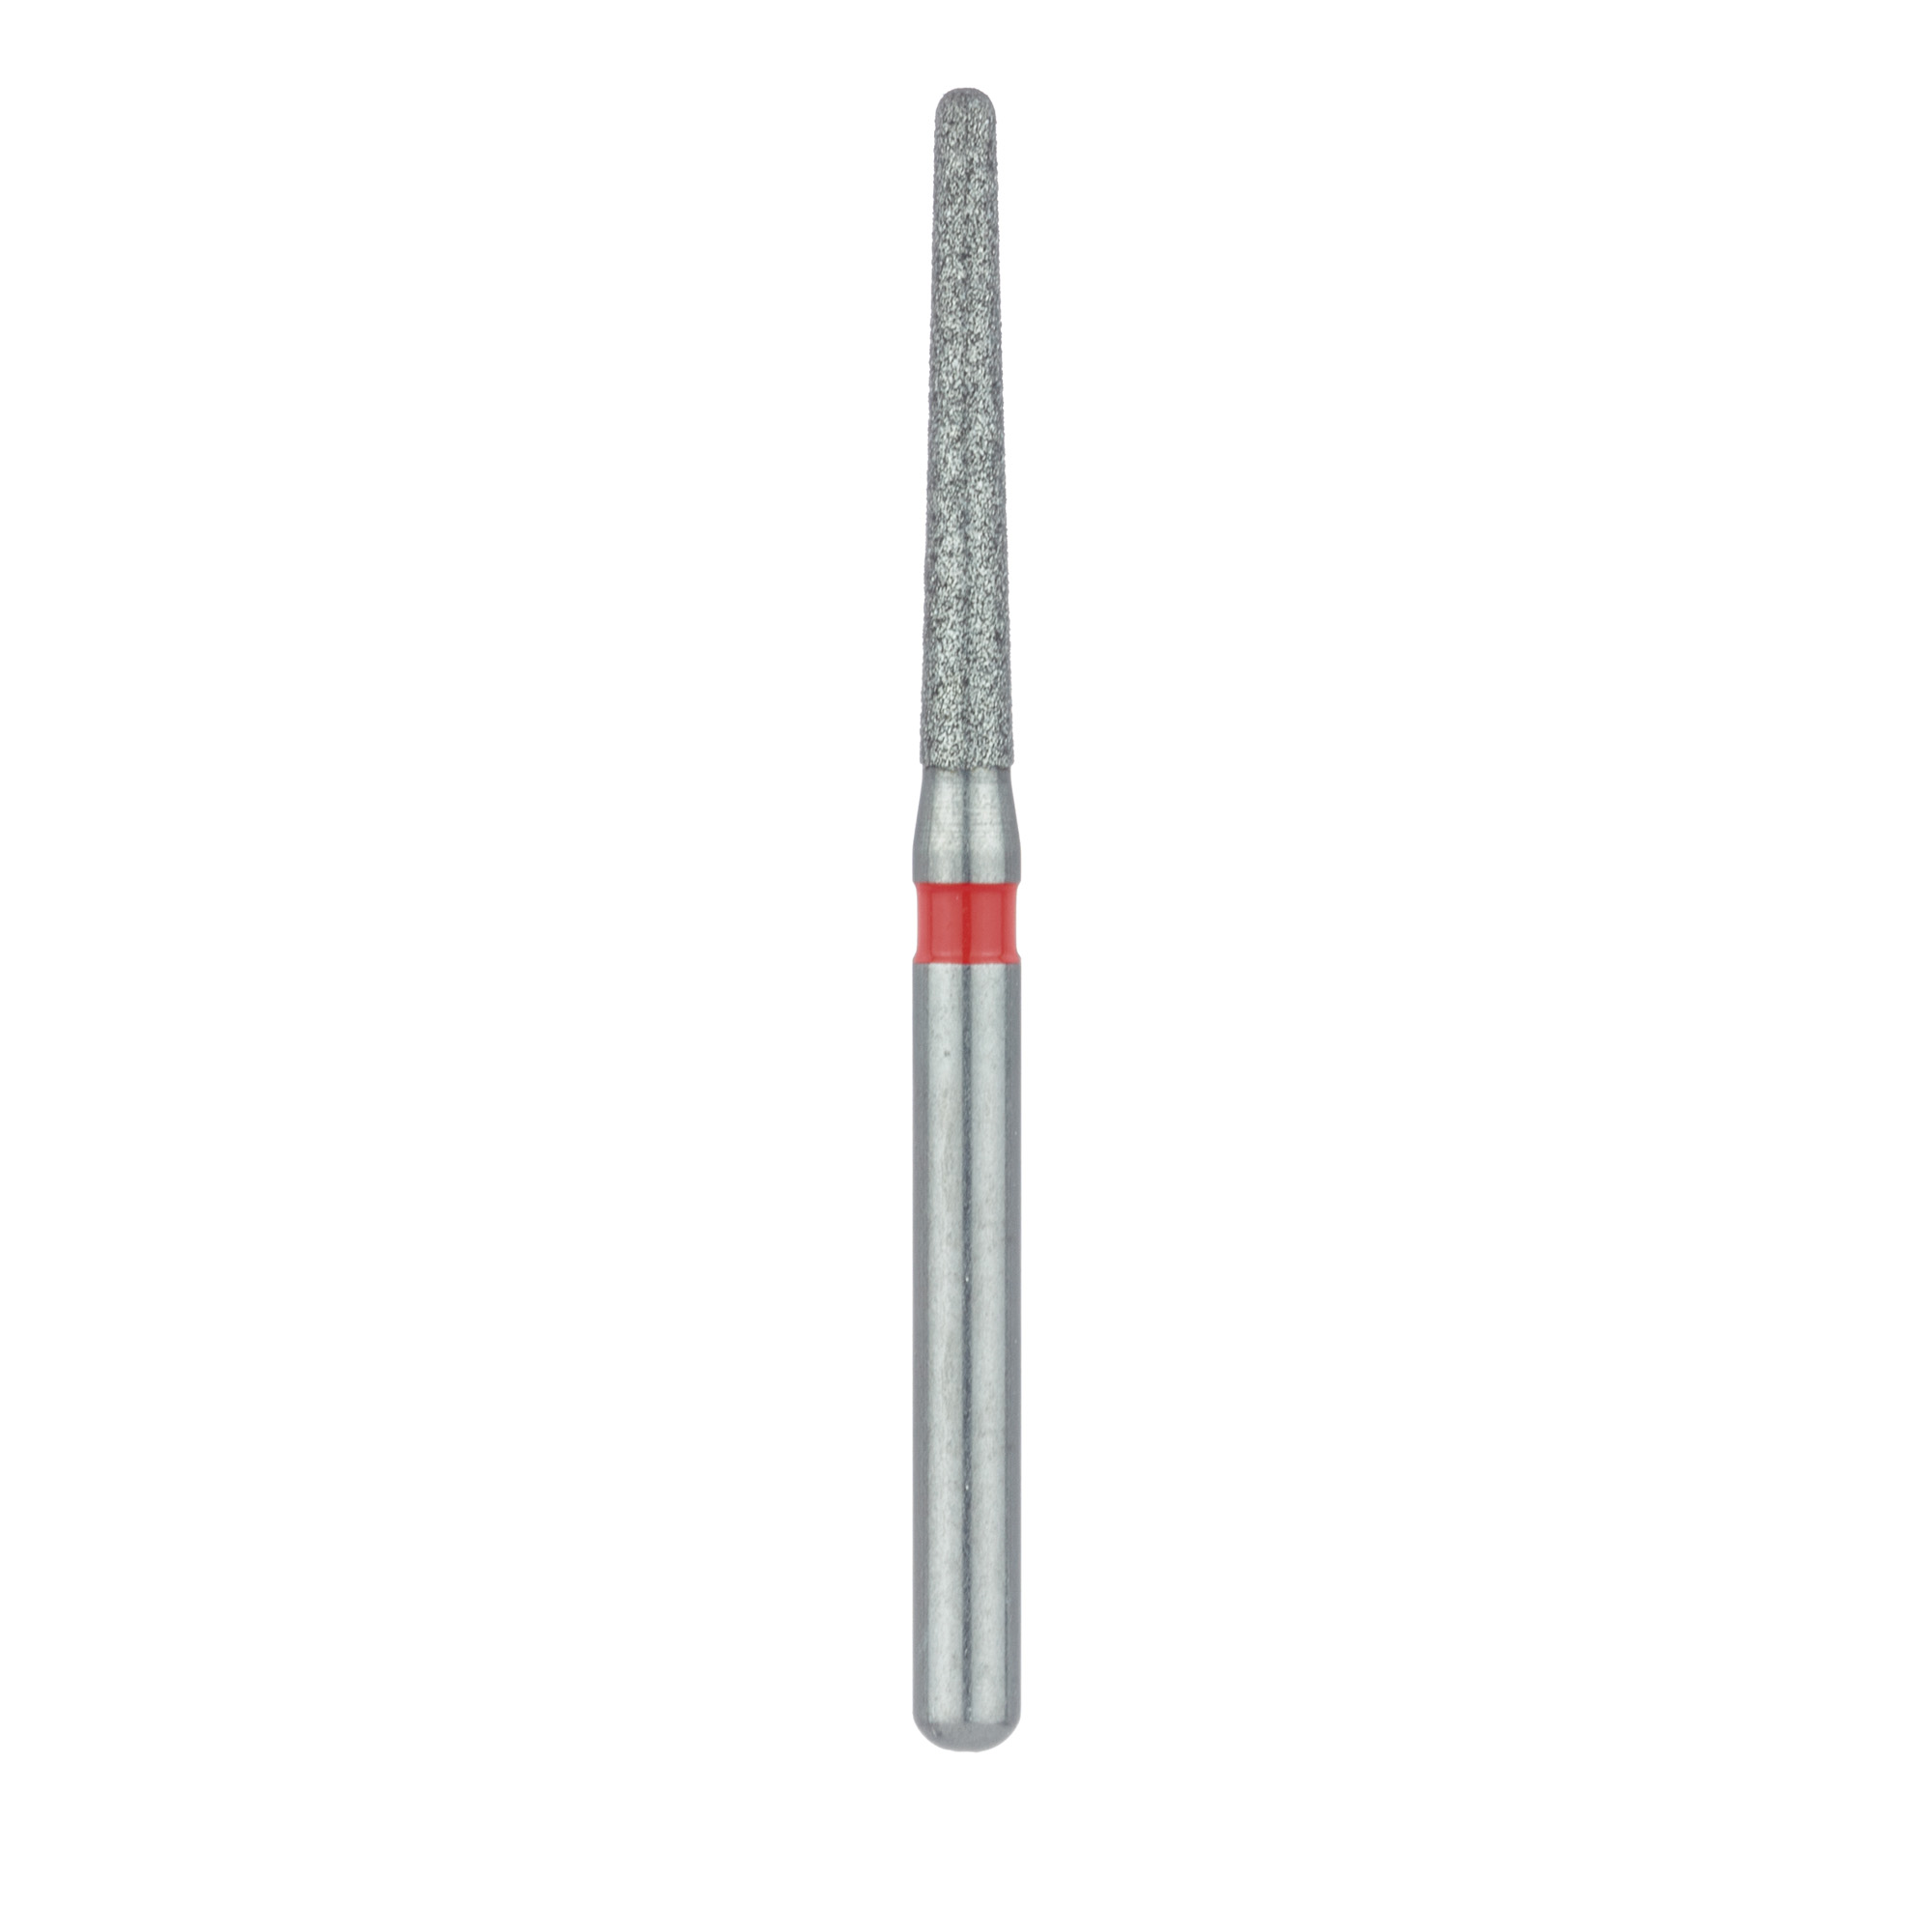 1114.10F Single-Use Diamond Bur, Sterile, 25 Pack, 1.4mm Ø, Tapered, Round End, 10mm Working Length, Fine, FG